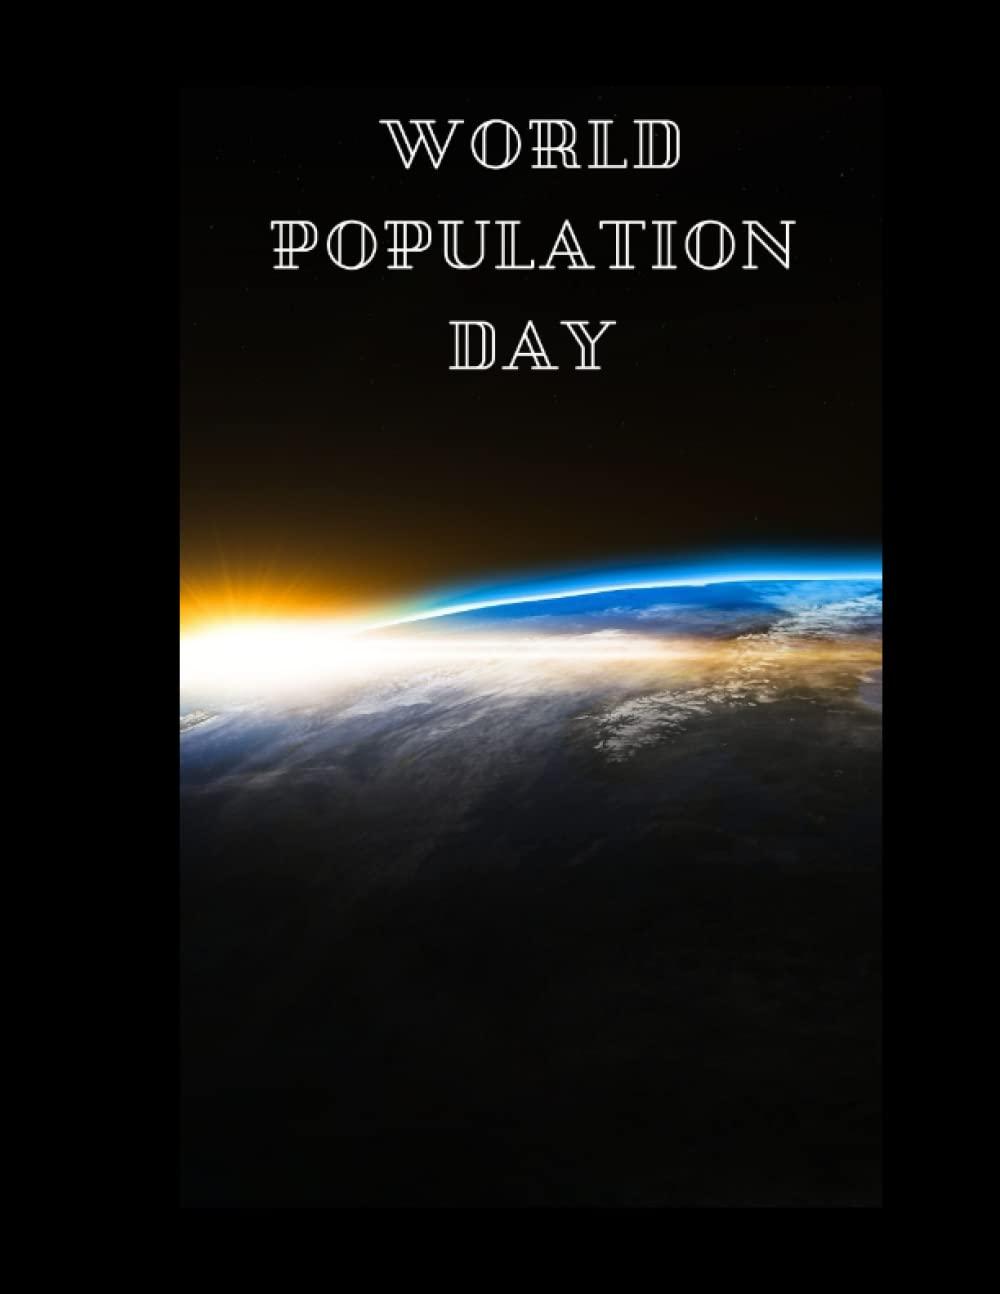 world population day 1st edition beepee publishers b0b4977bdl